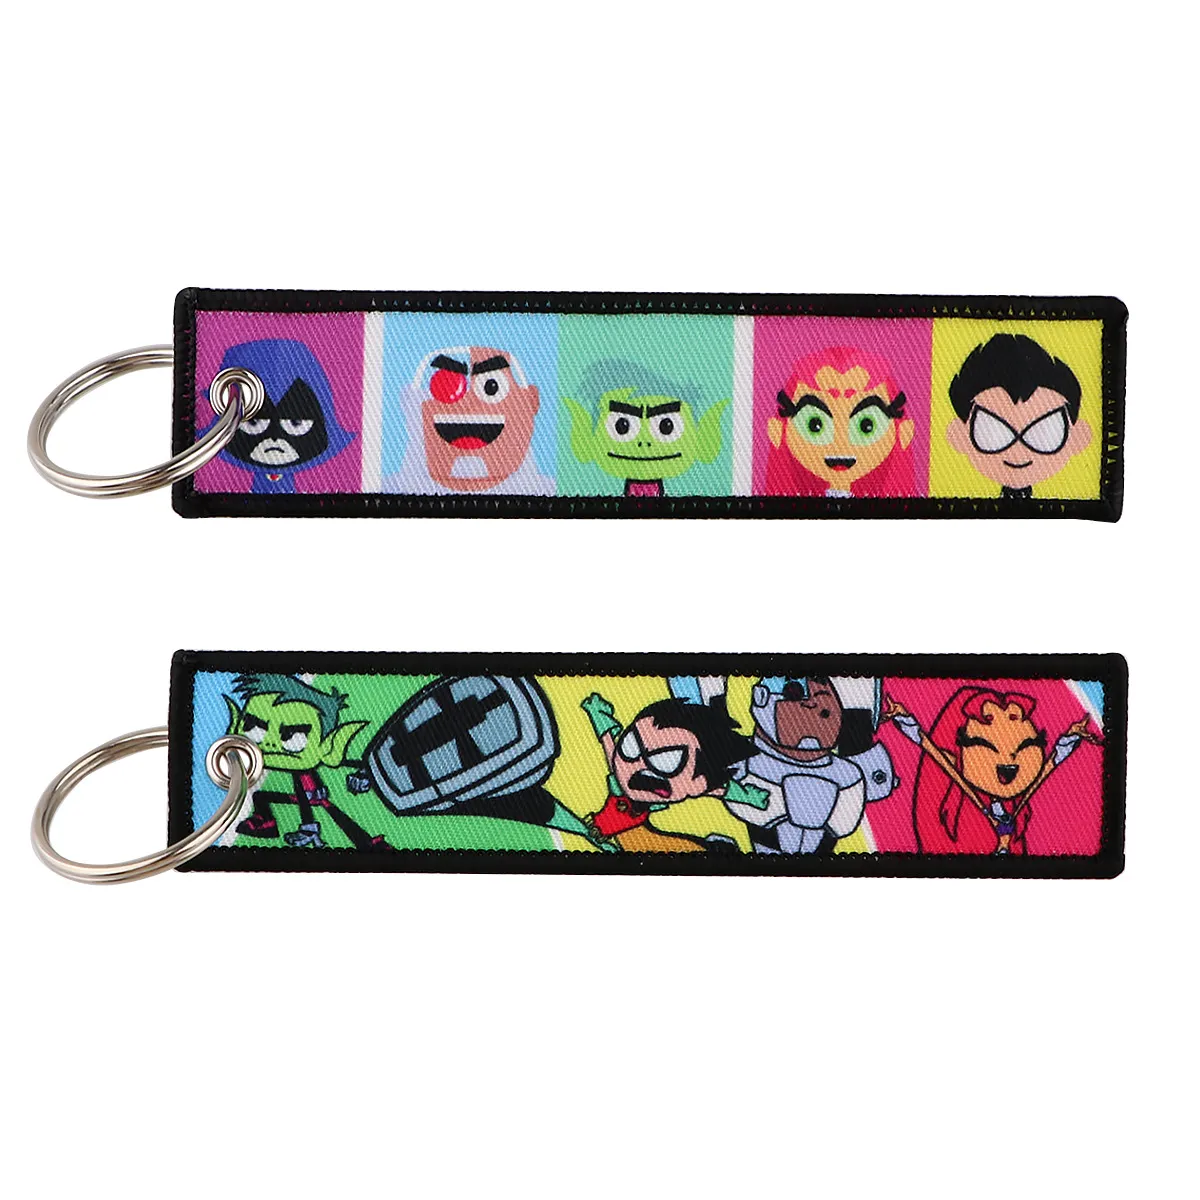 Keychains & Lanyards Various Types Of Cartoon Cool Key Tag Embroidery Fobs For Motorcycles Cars Bag Backpack Keychain Fashion Ring Gi Ot2Km